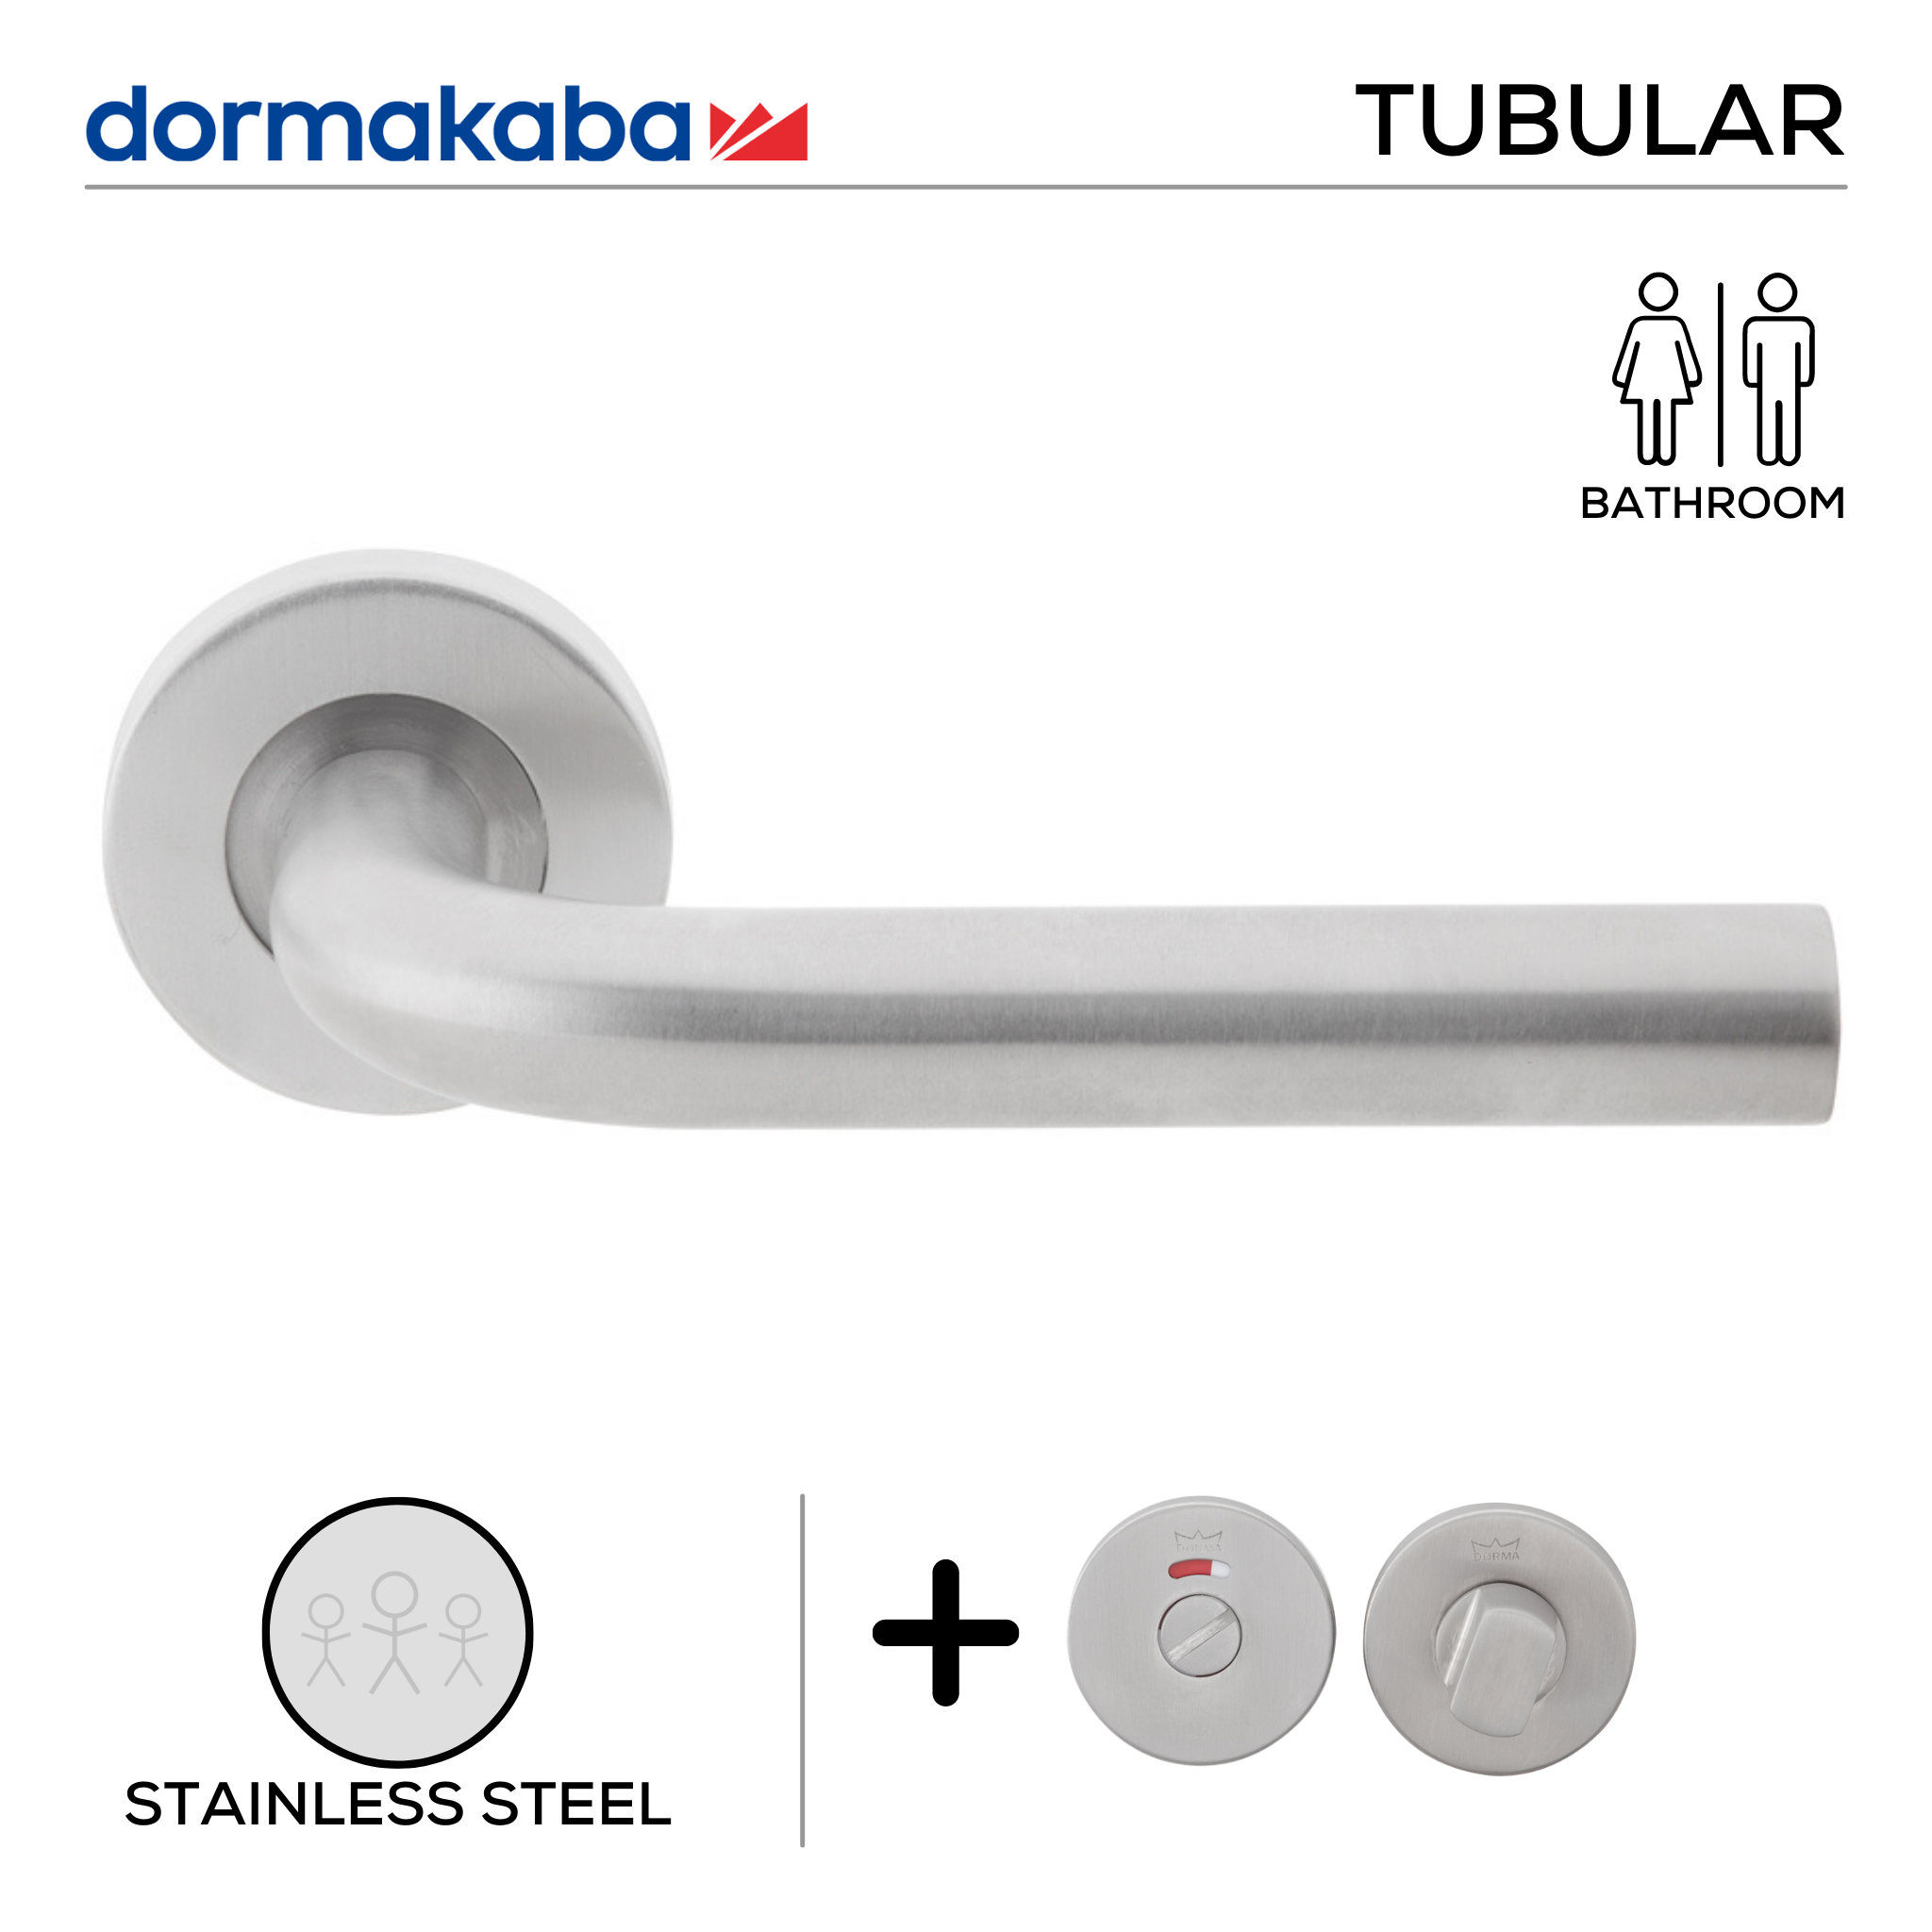 TH 126 Bathroom W/C, Lever Handles, Tubular, On Round Rose, With Bathroom (WC) Indicator Set - DWC 005, 148mm (l), Stainless Steel, DORMAKABA